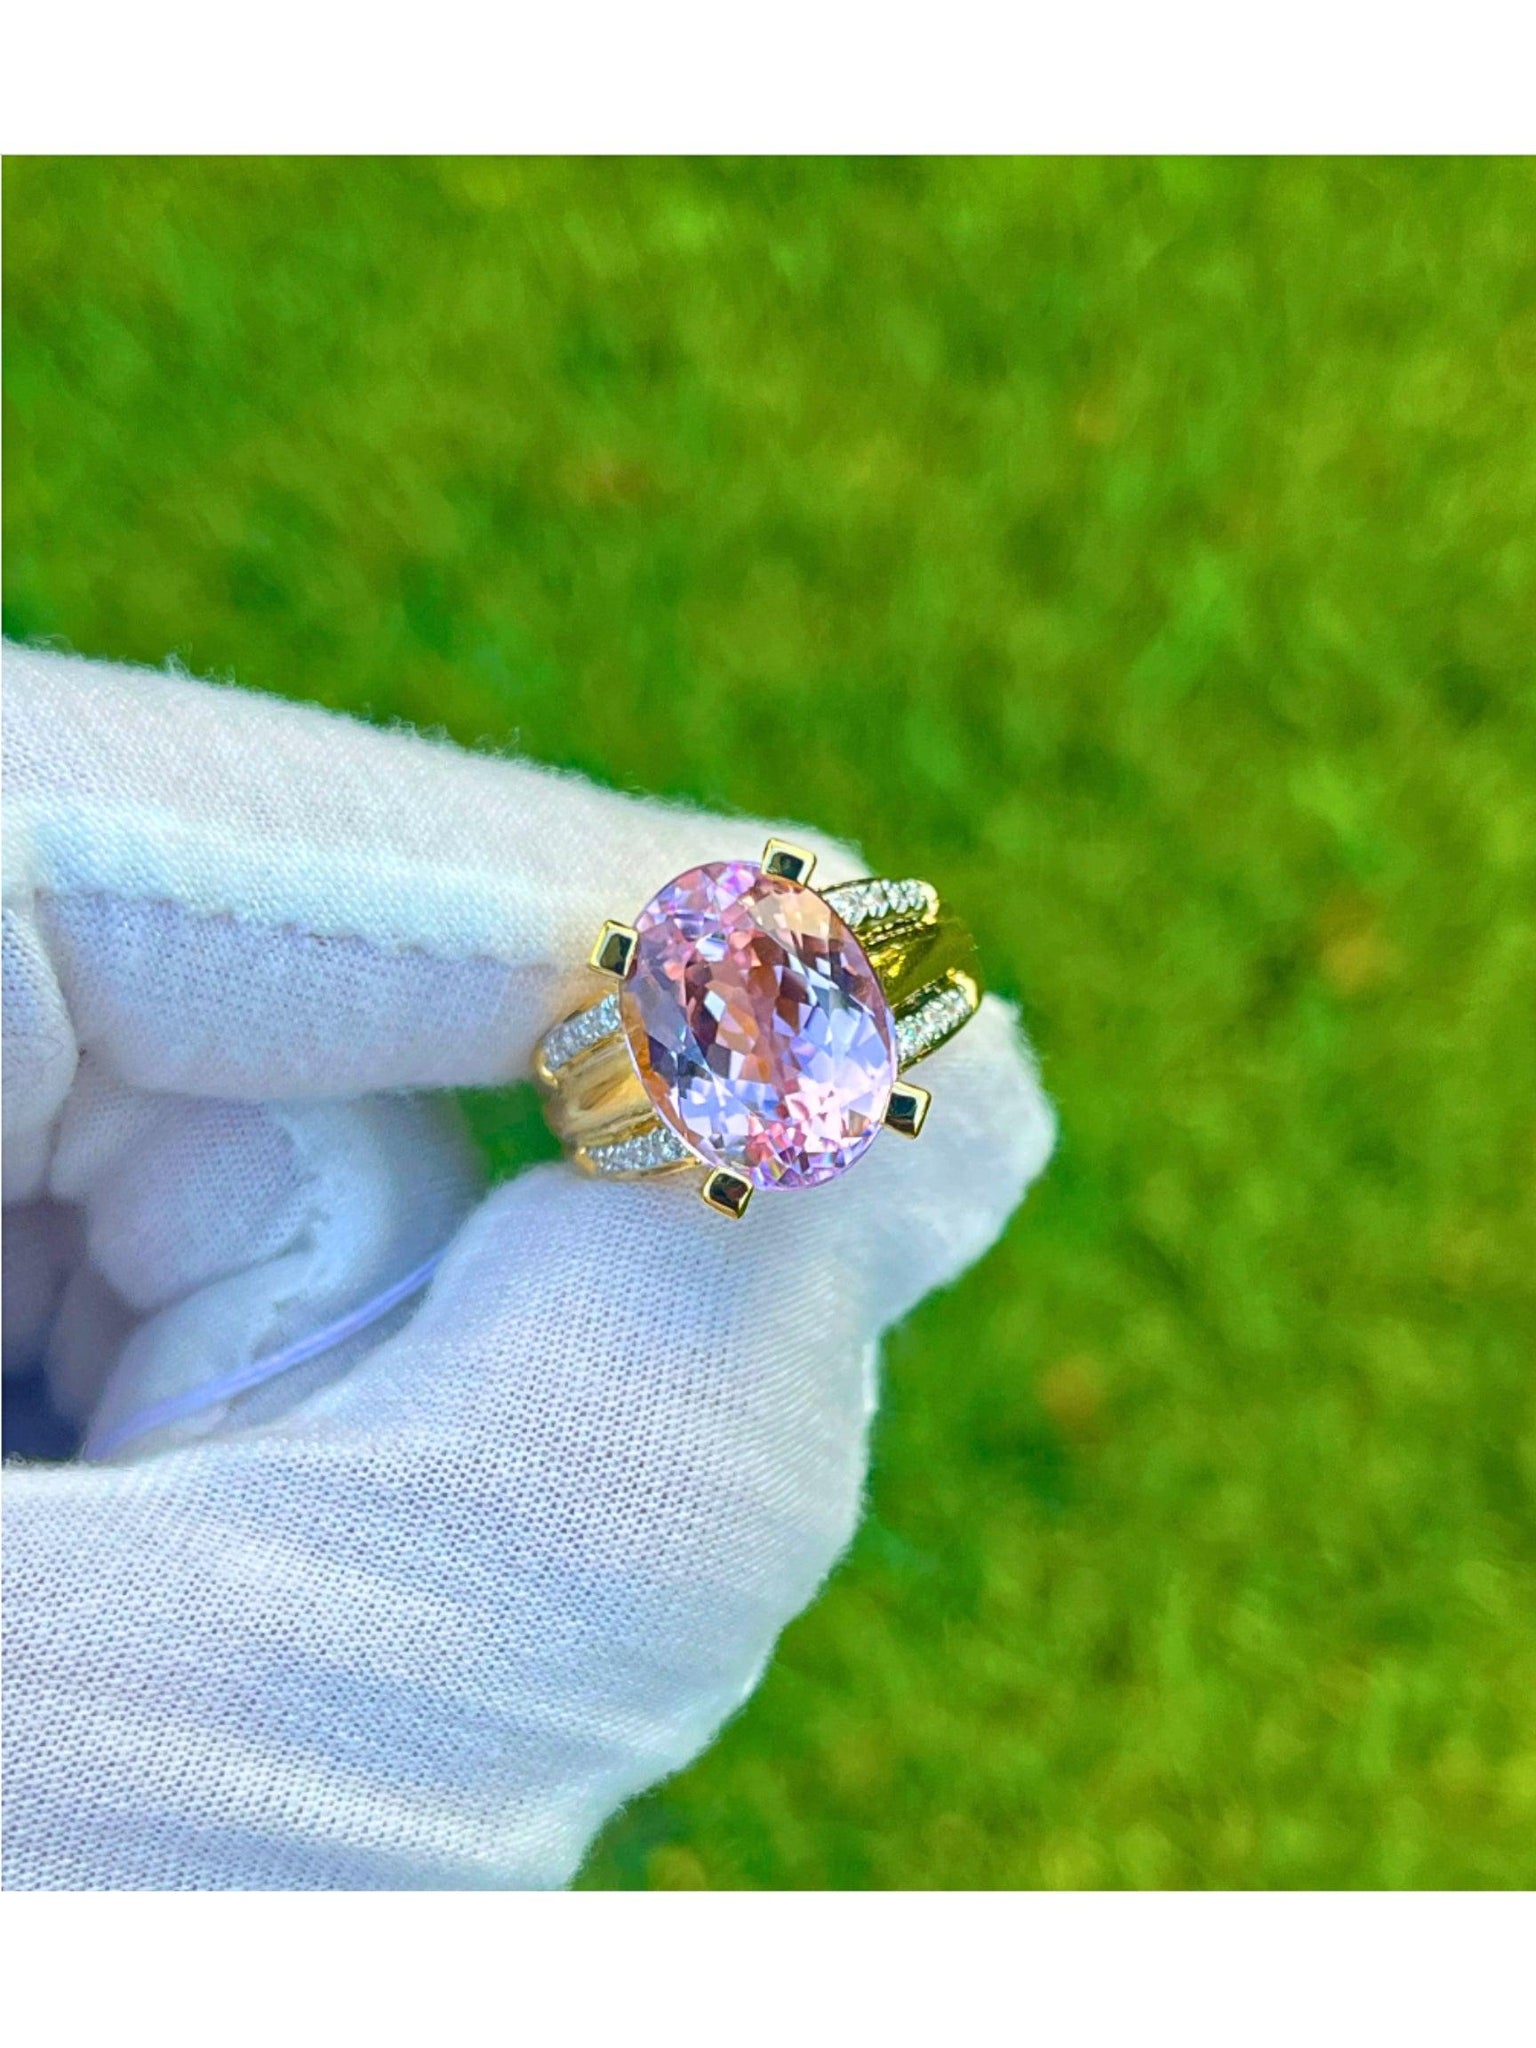 Vintage 9.50 Carat Oval Cut Pink Kunzite with Diamond Side Stone Cocktail Ring in 18K Yellow Gold